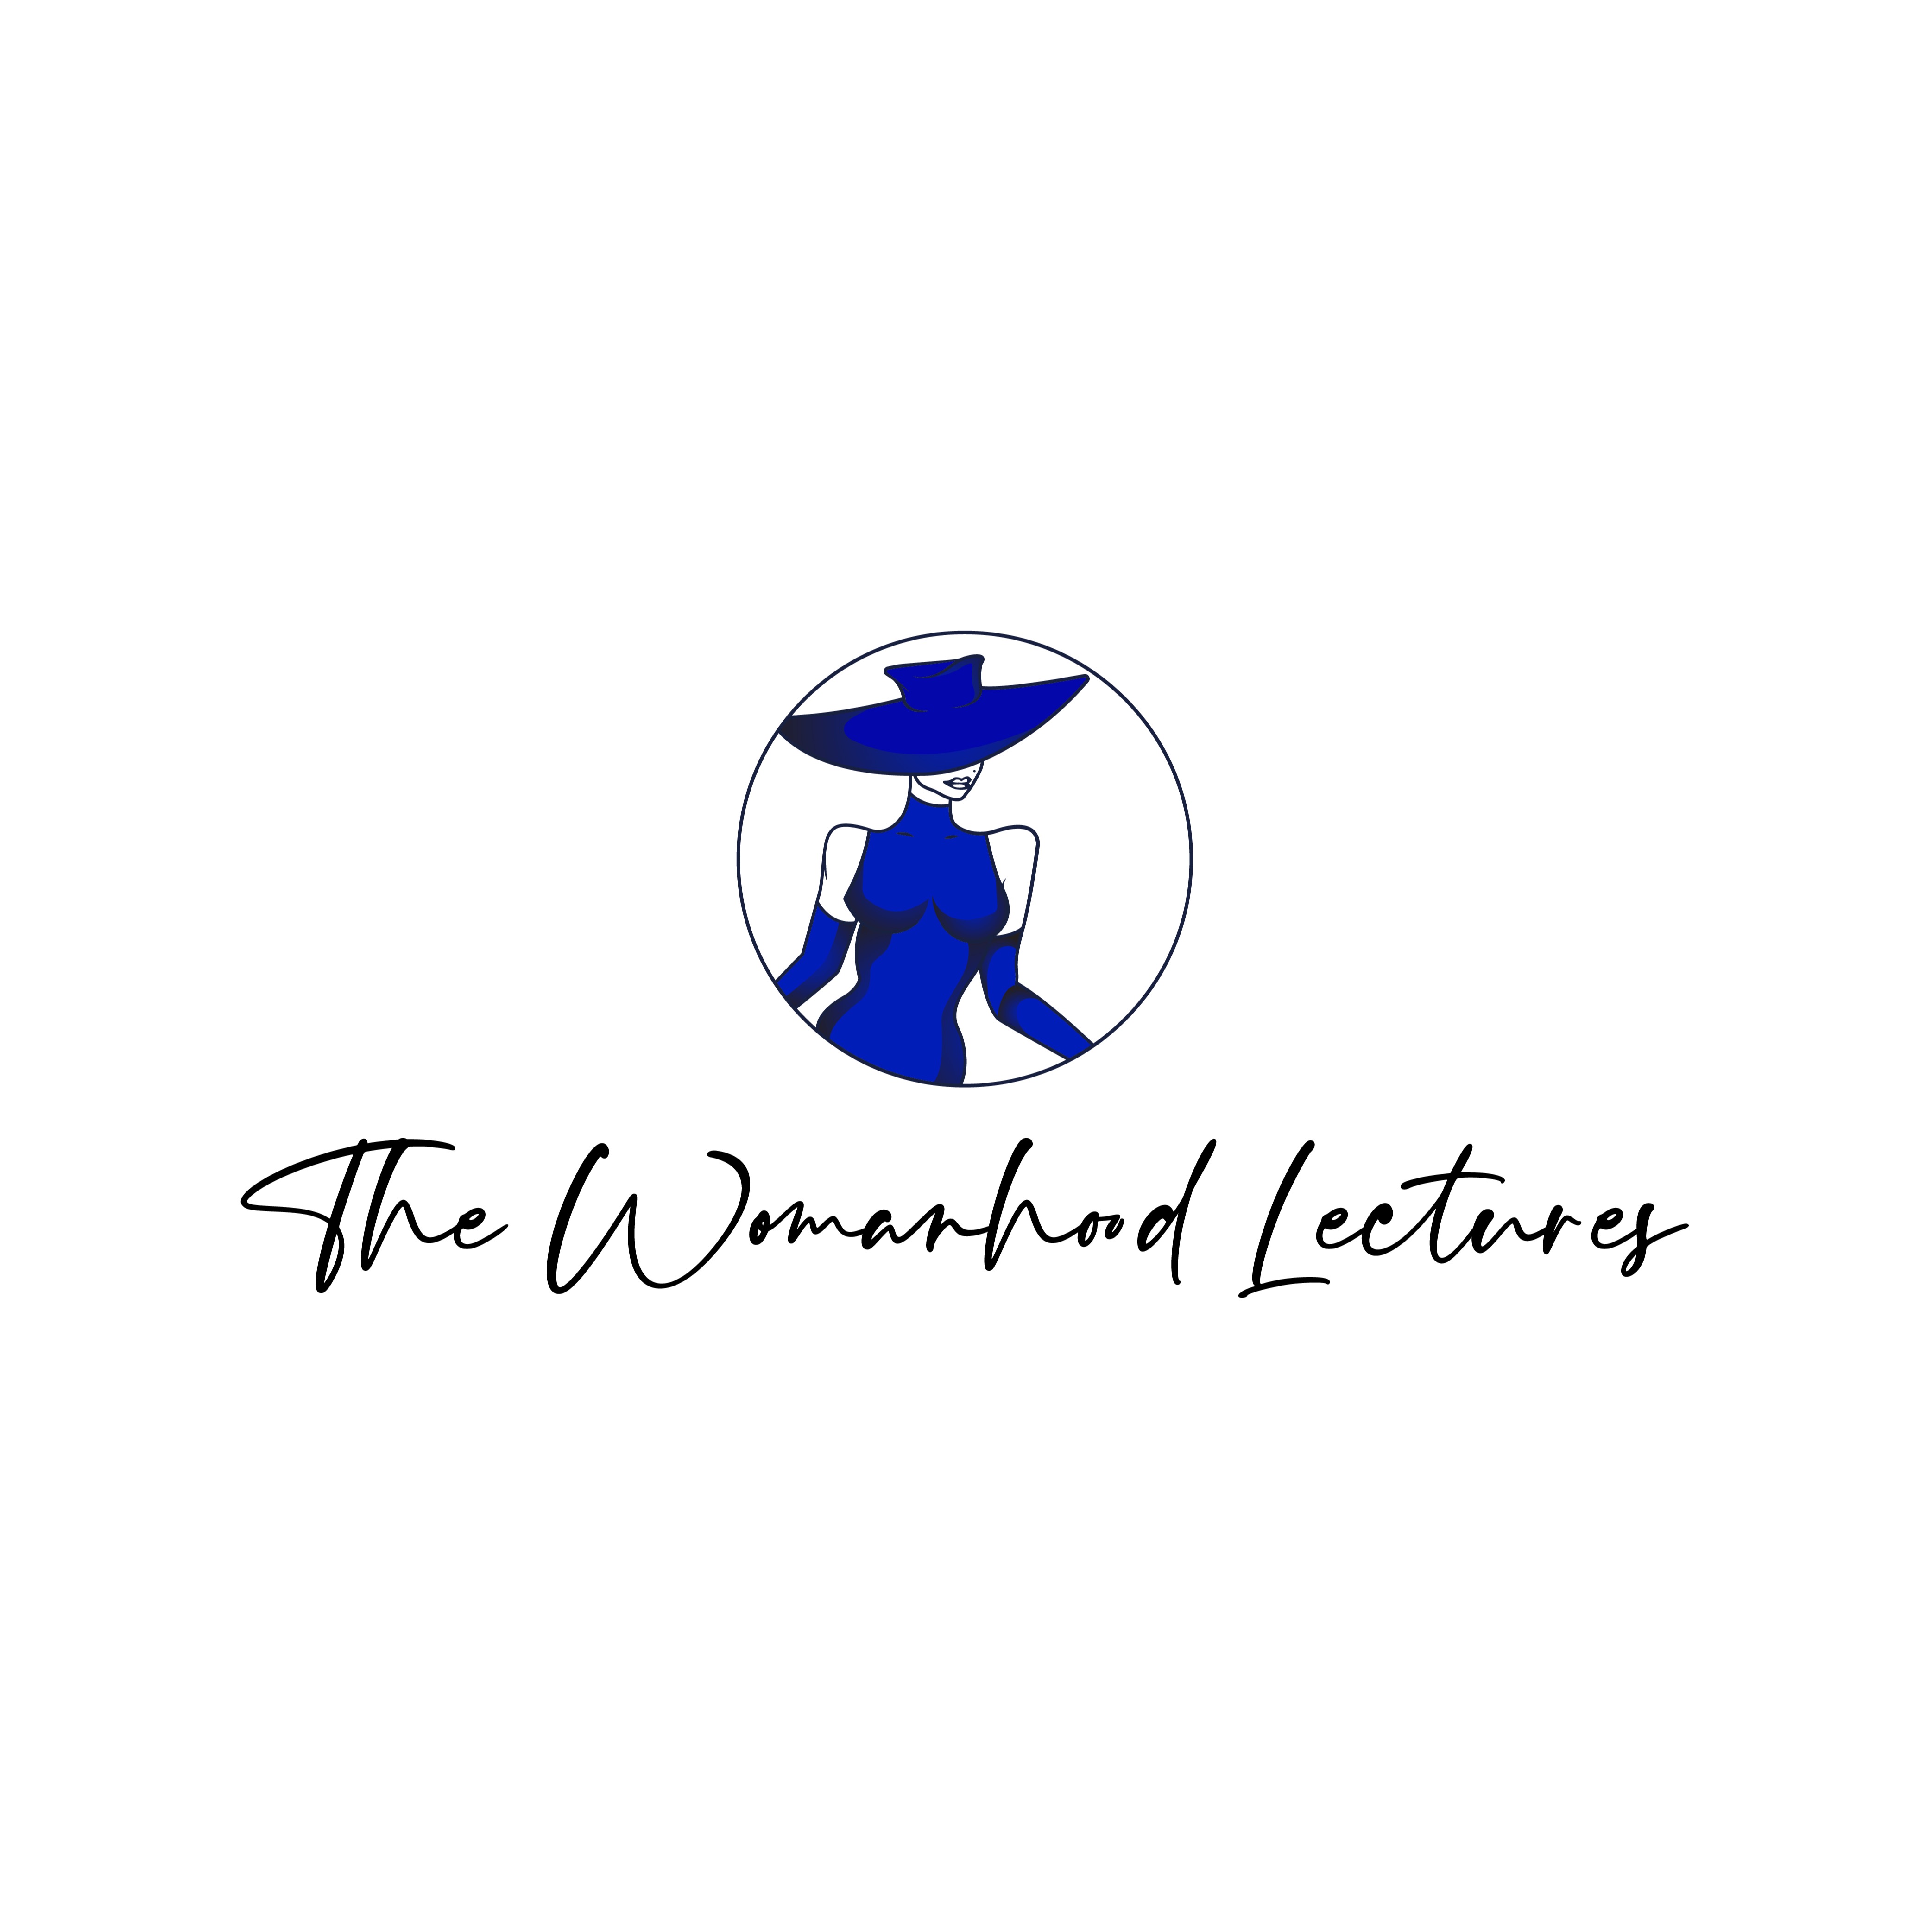 The Womanhood Lectures logo